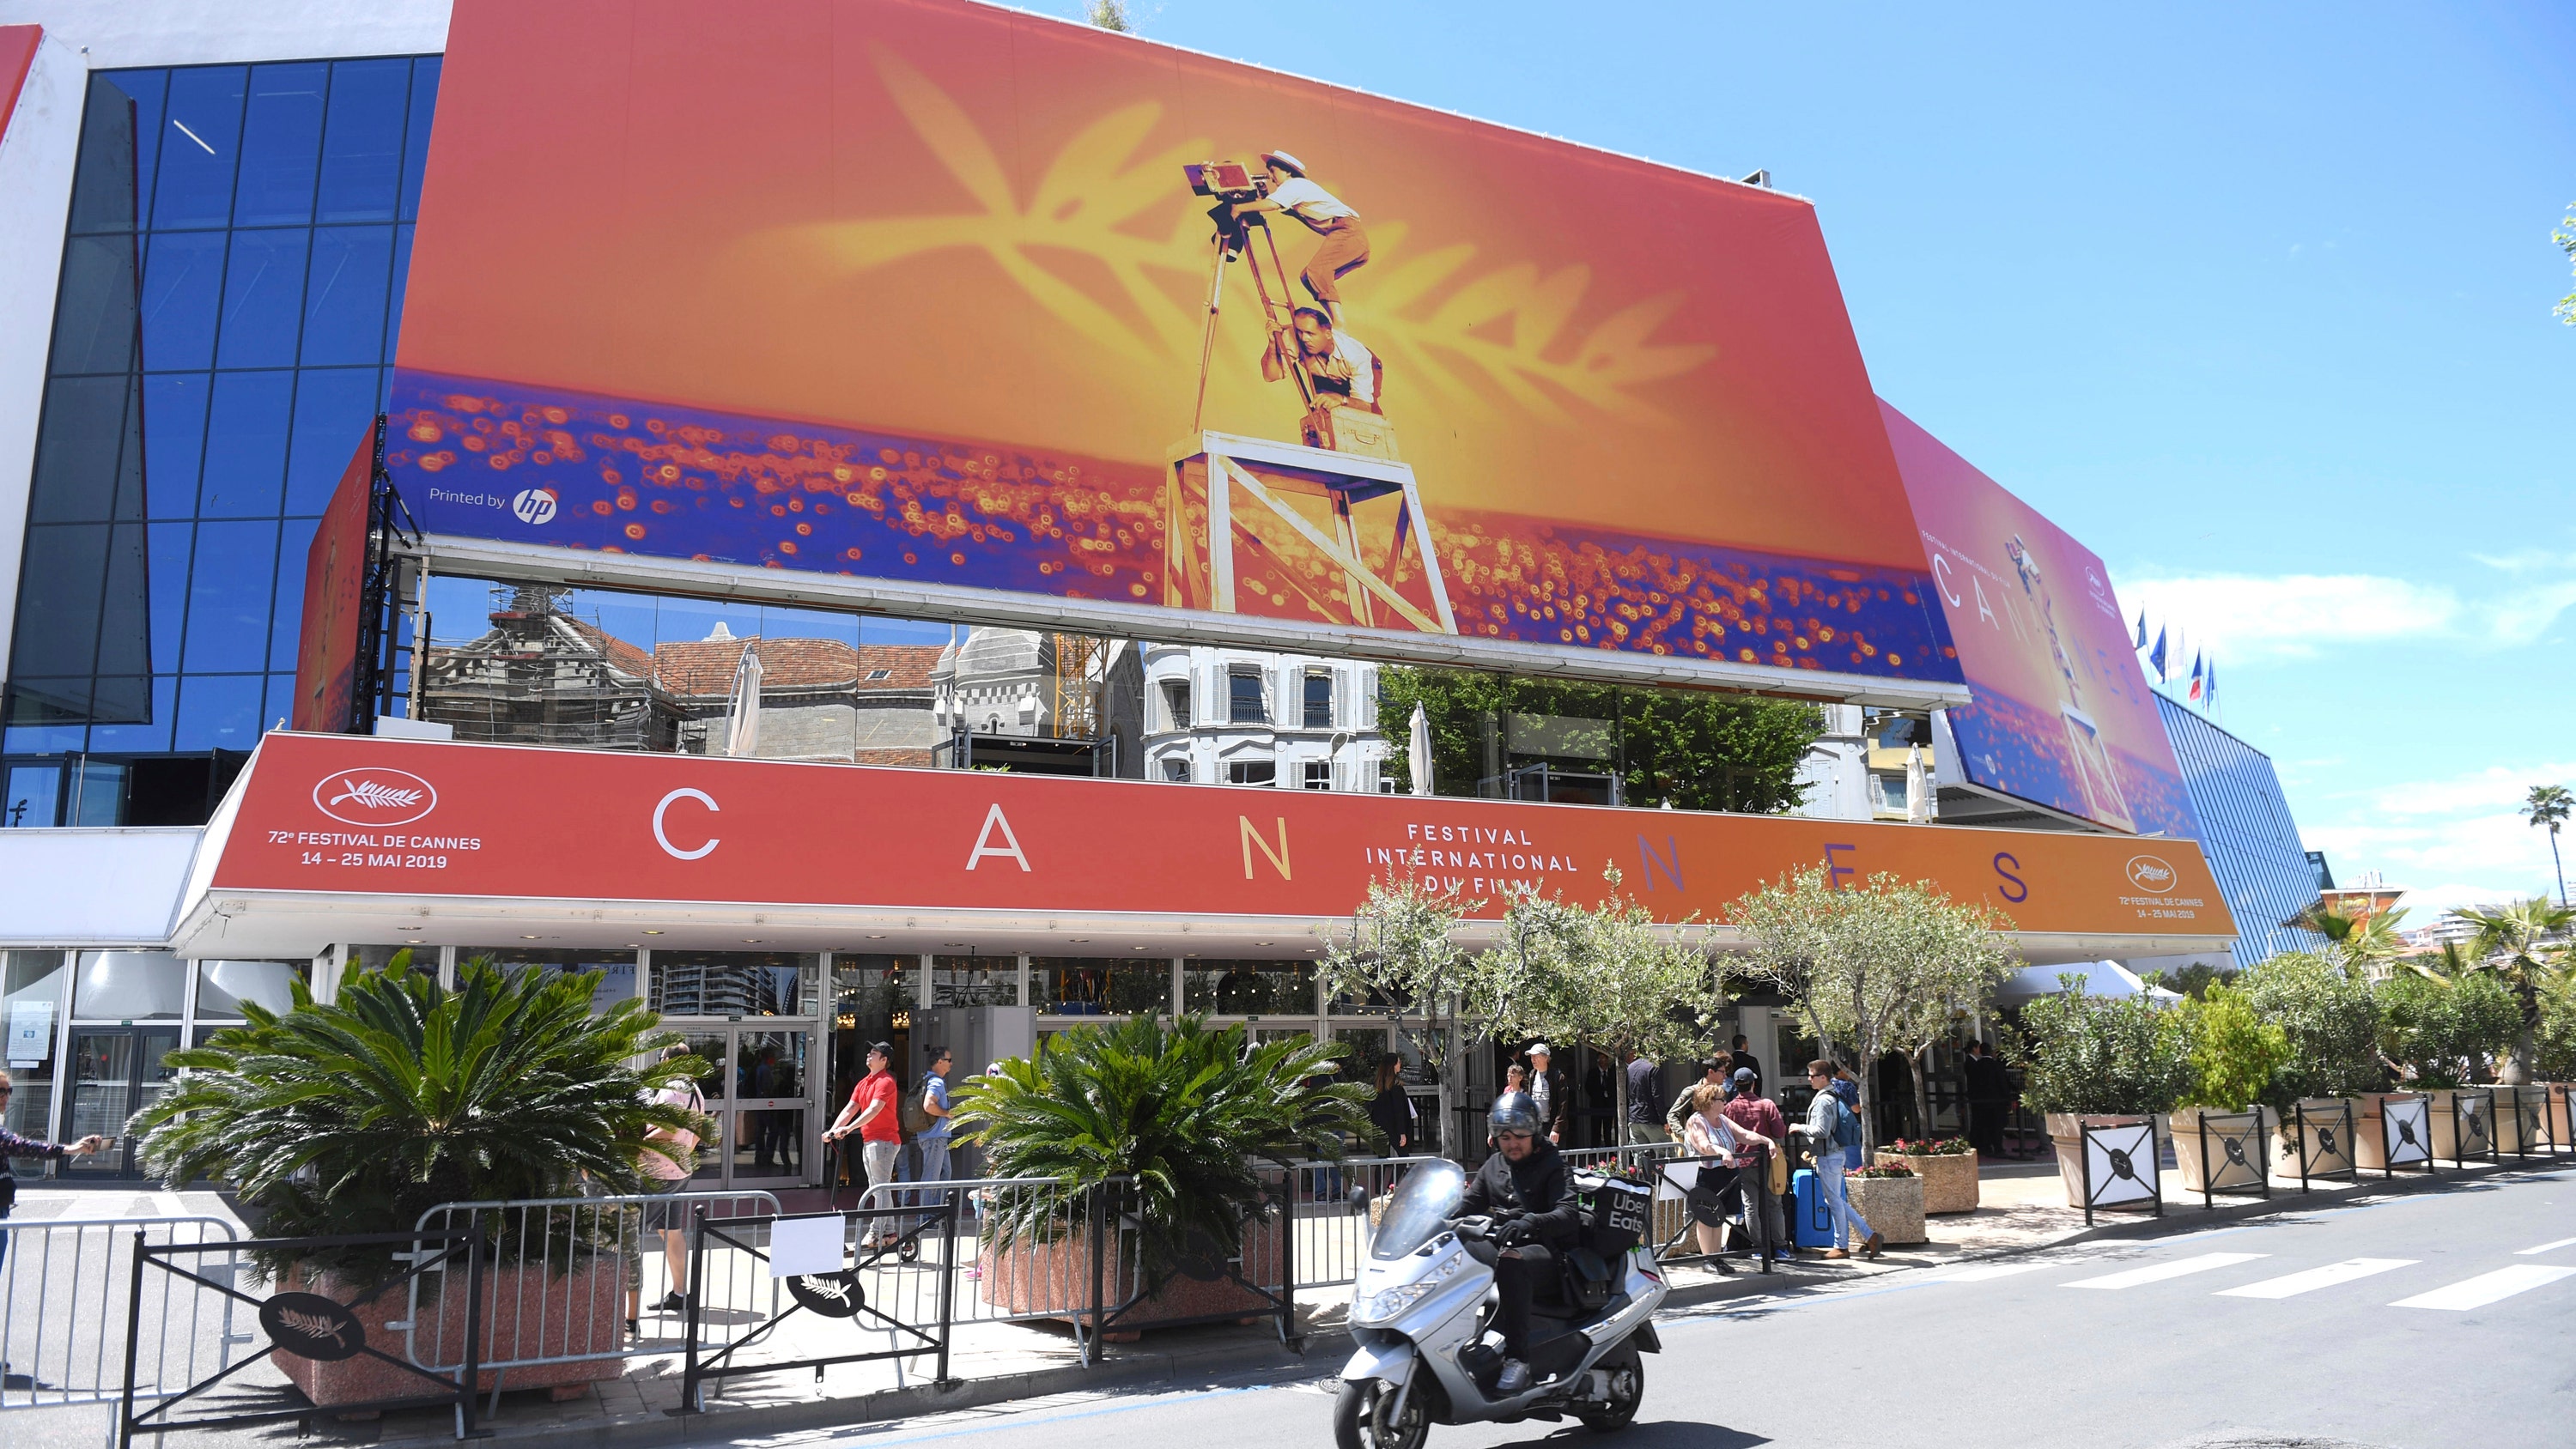 Cannes Film Festival not taking place in June, organizers exploring options  | Fox News